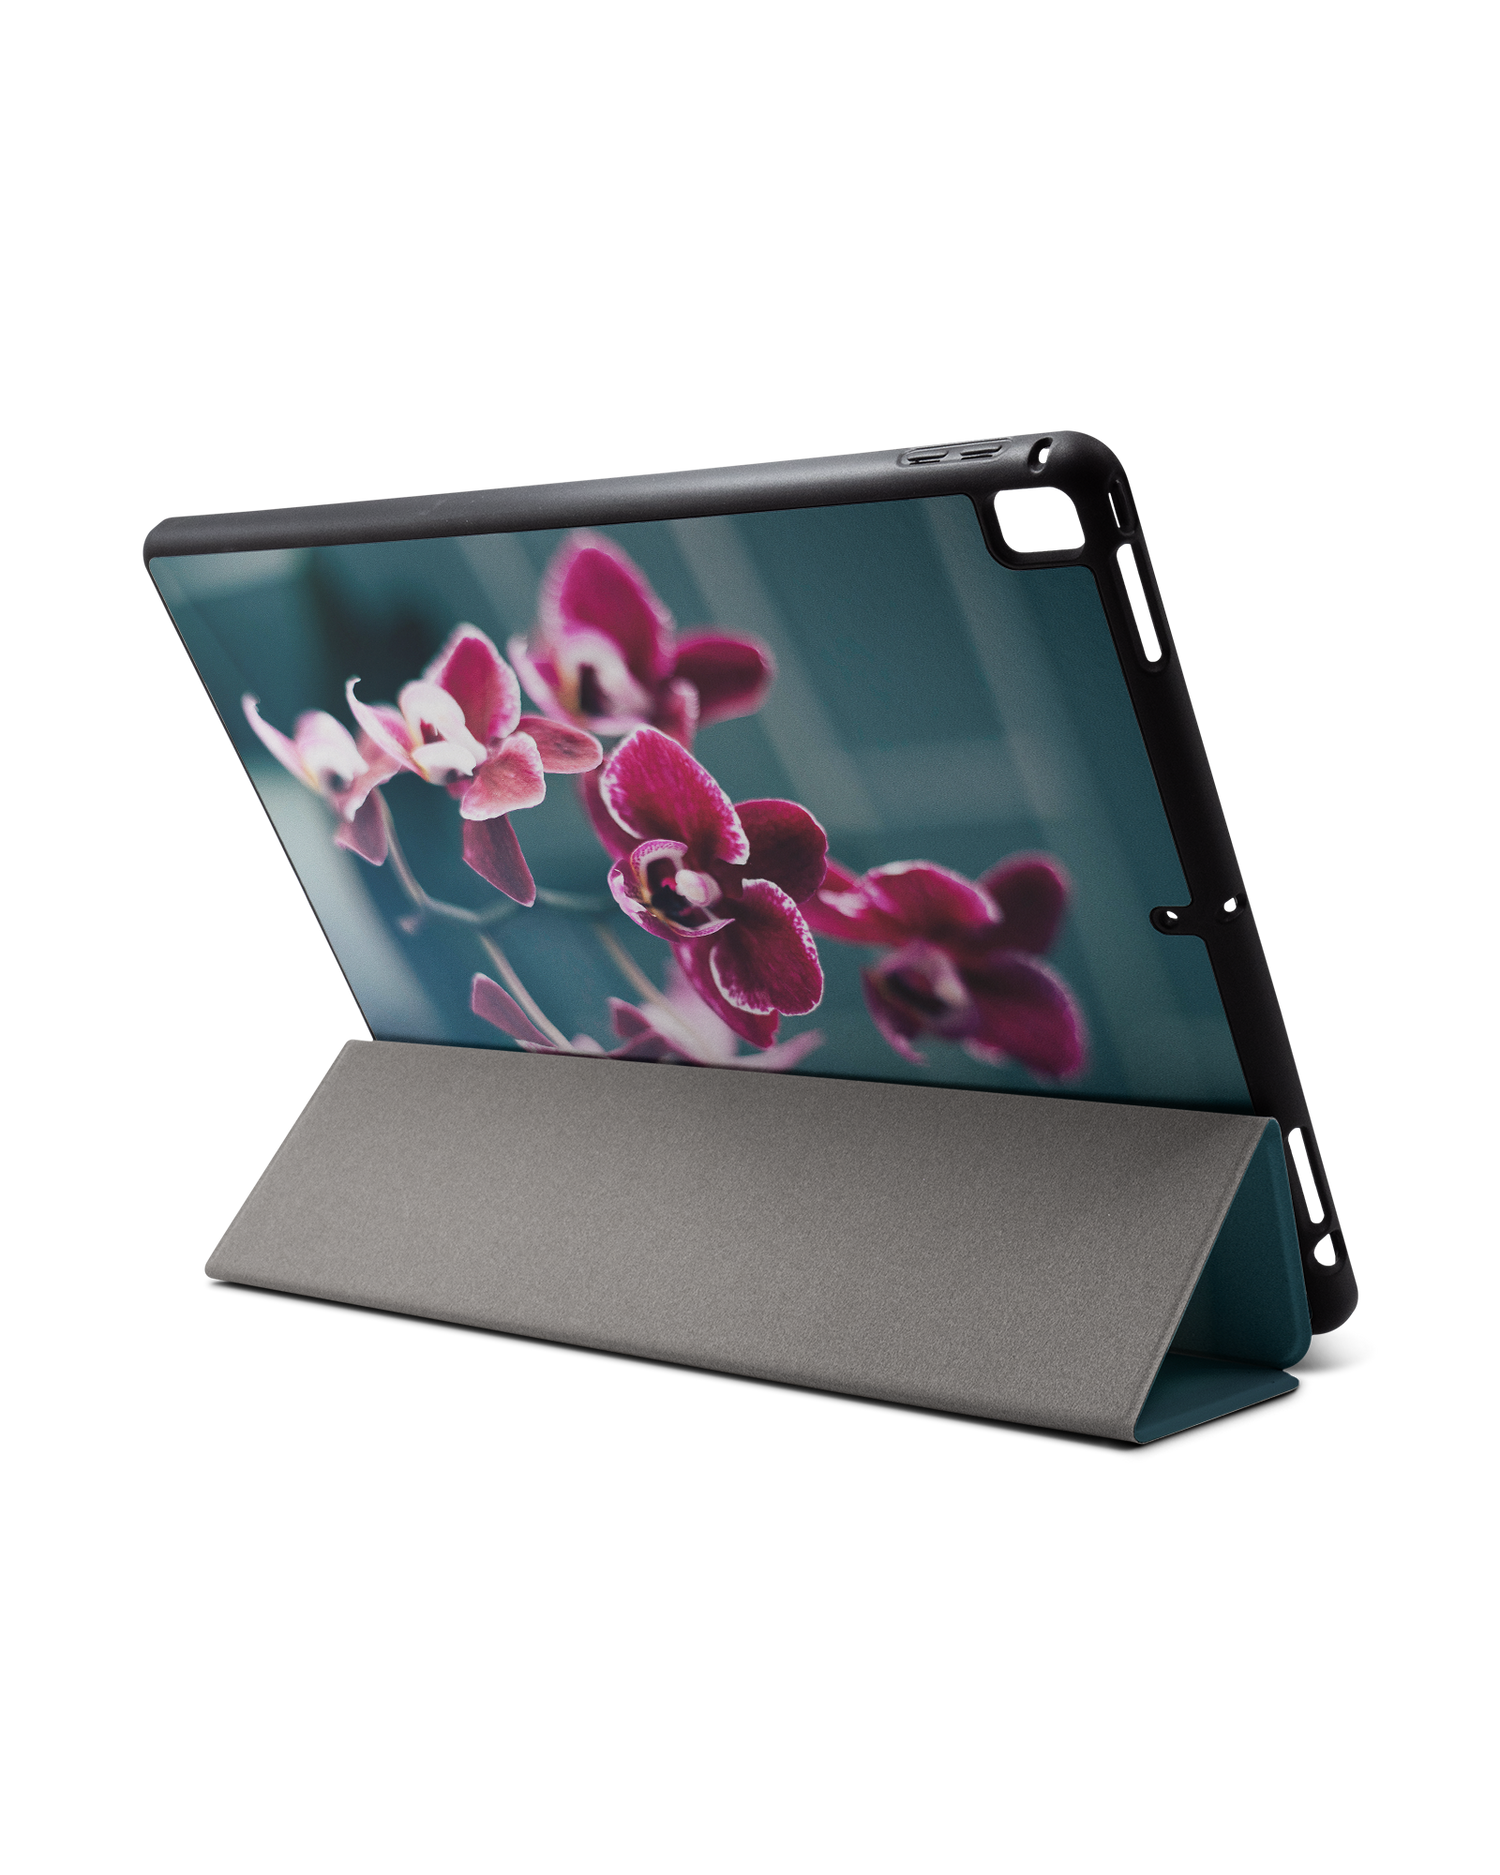 Orchid iPad Case with Pencil Holder for Apple iPad Pro 2 12.9